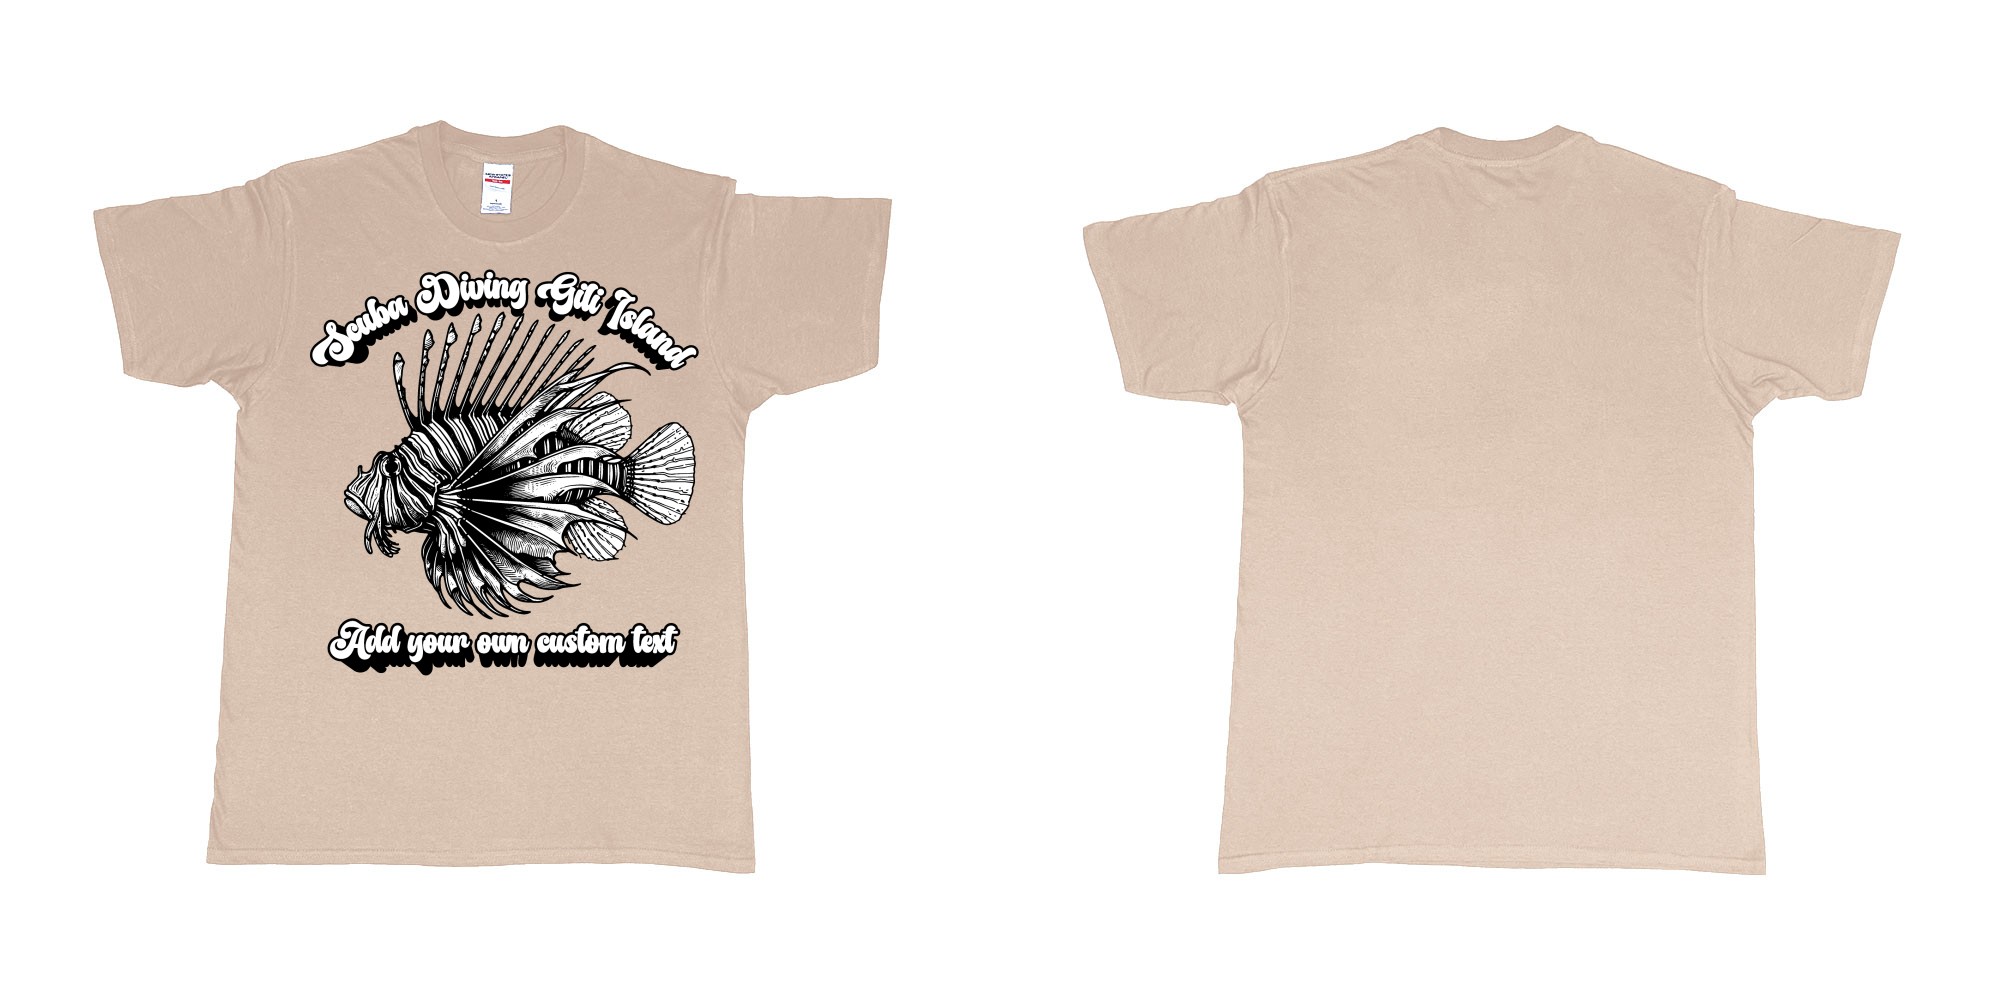 Custom tshirt design lion fish scuba diving gili islands custom print in fabric color sand choice your own text made in Bali by The Pirate Way